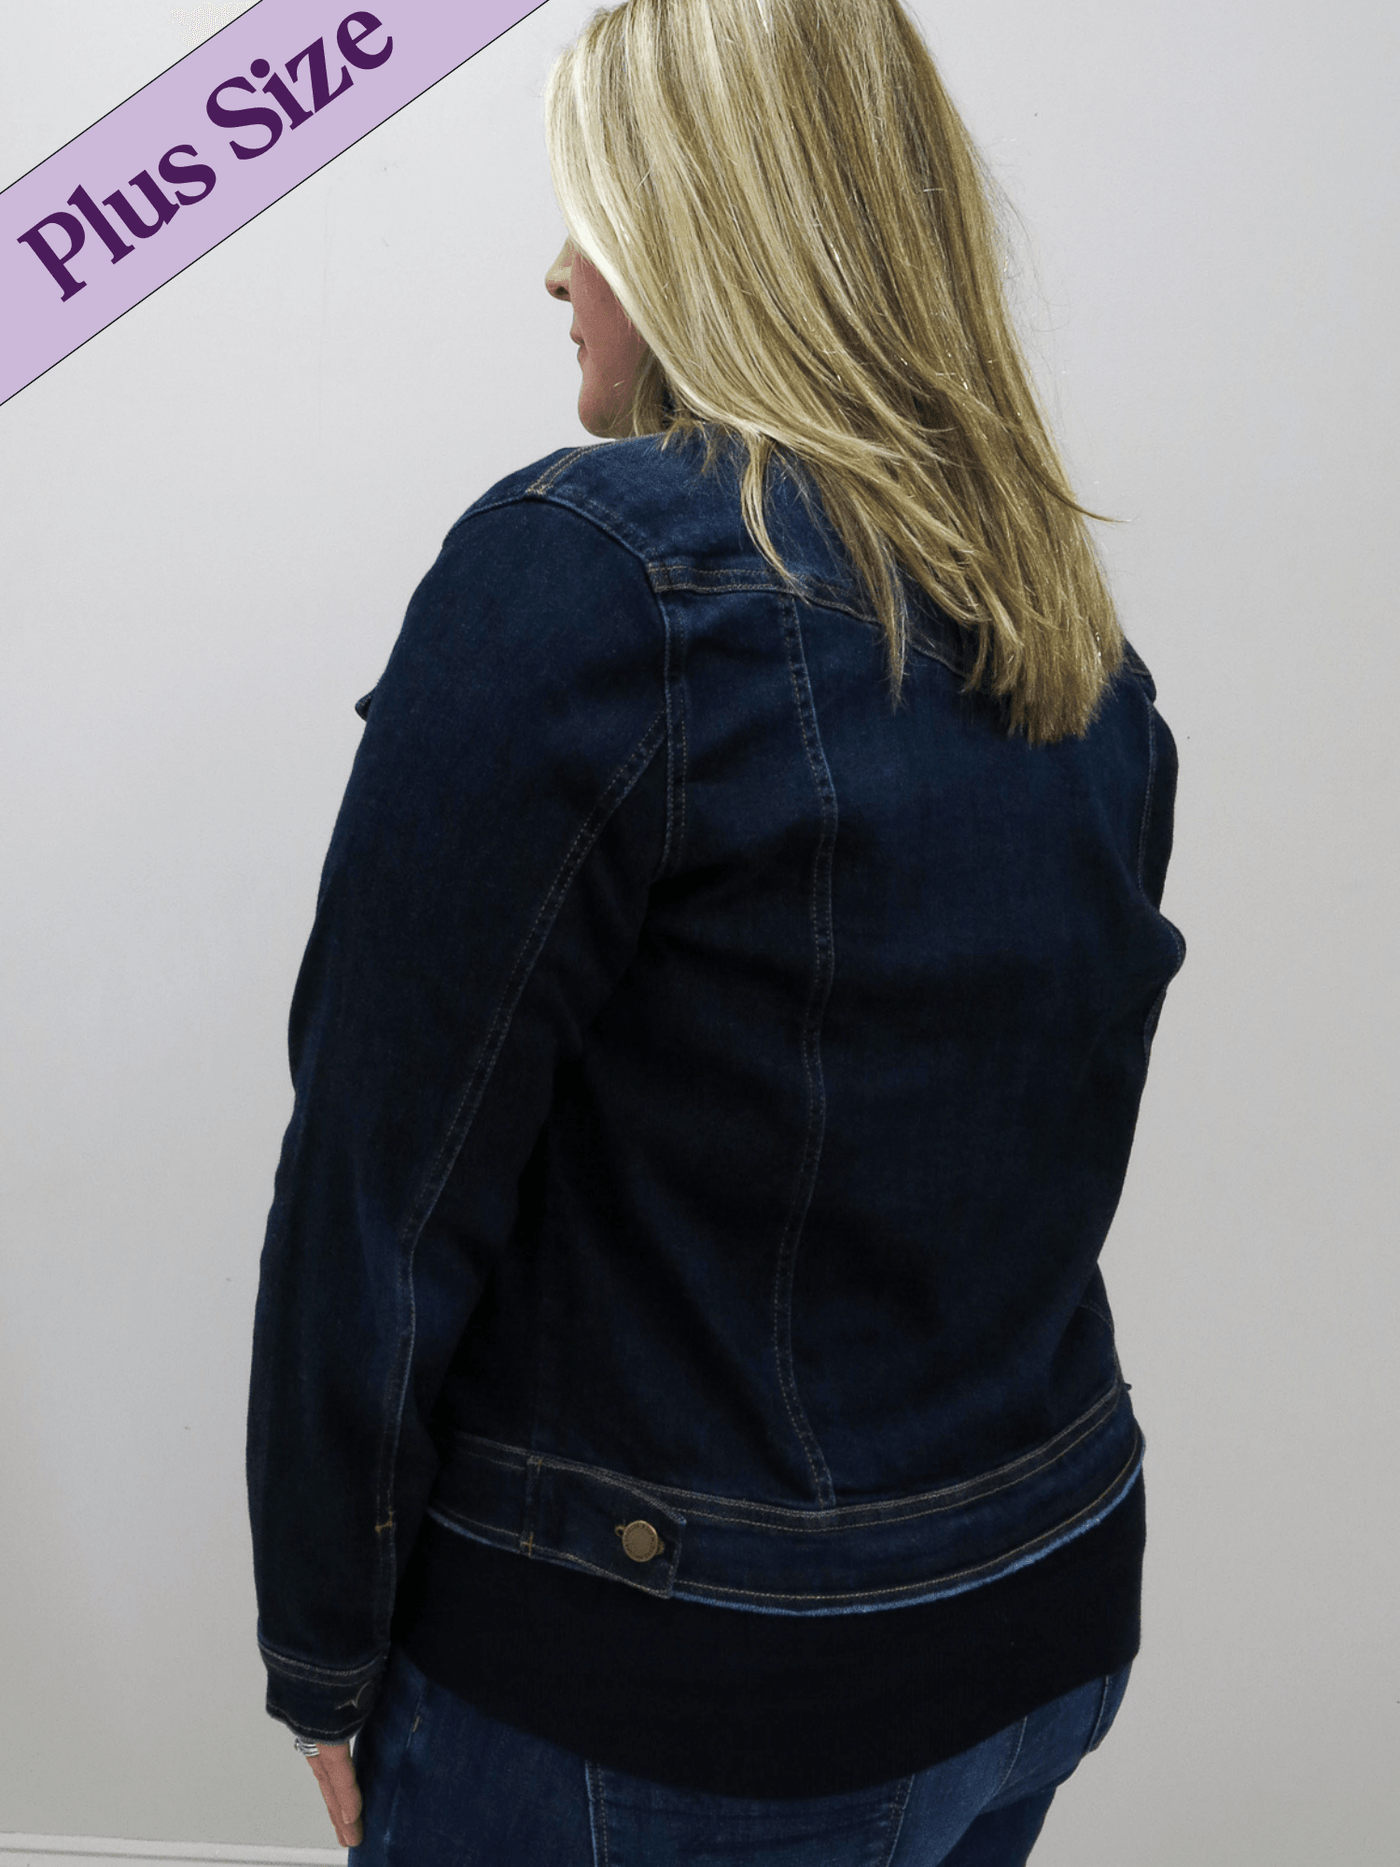 Risen plus size classic jean jacket with copper buttons back view.